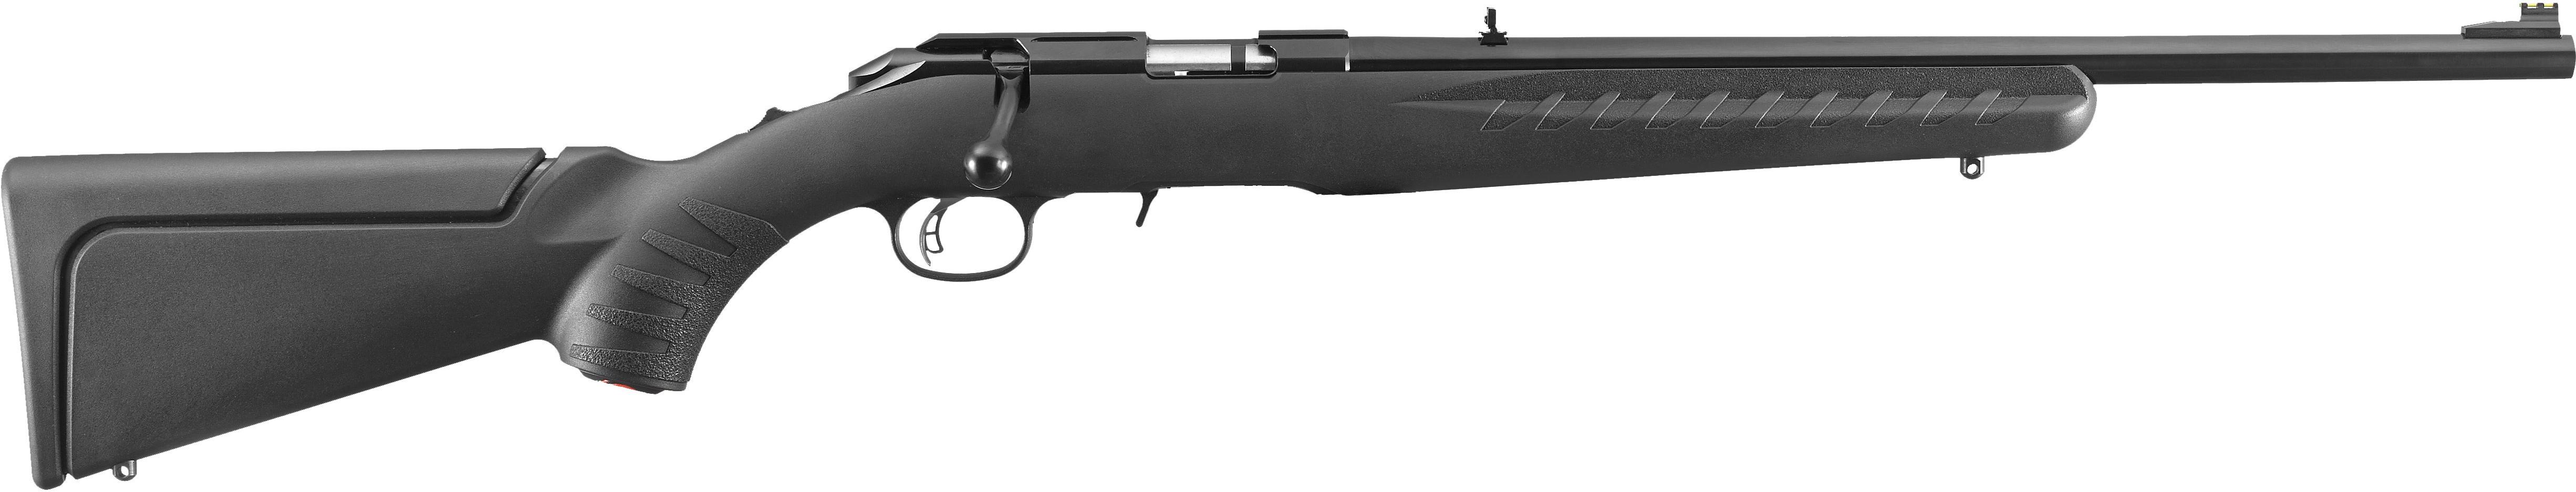 Ruger American Rimfire Compact (8303)
								